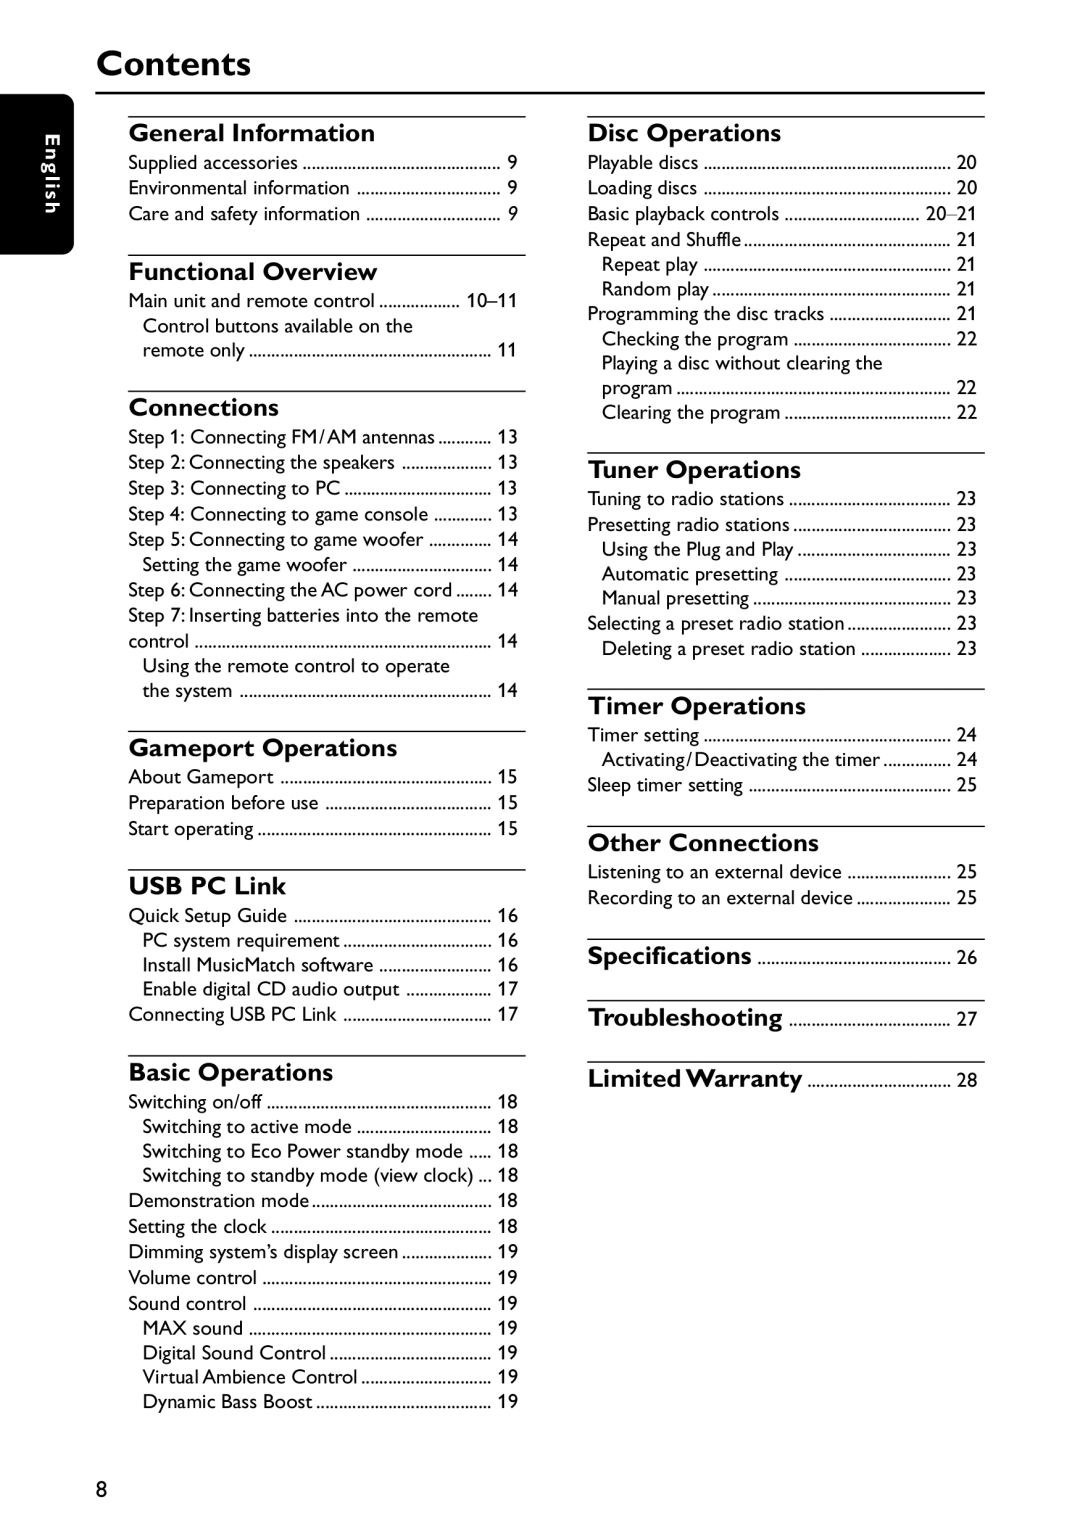 Philips FWC579 warranty Contents, General Information, Functional Overview, Connections, Gameport Operations, USB PC Link 